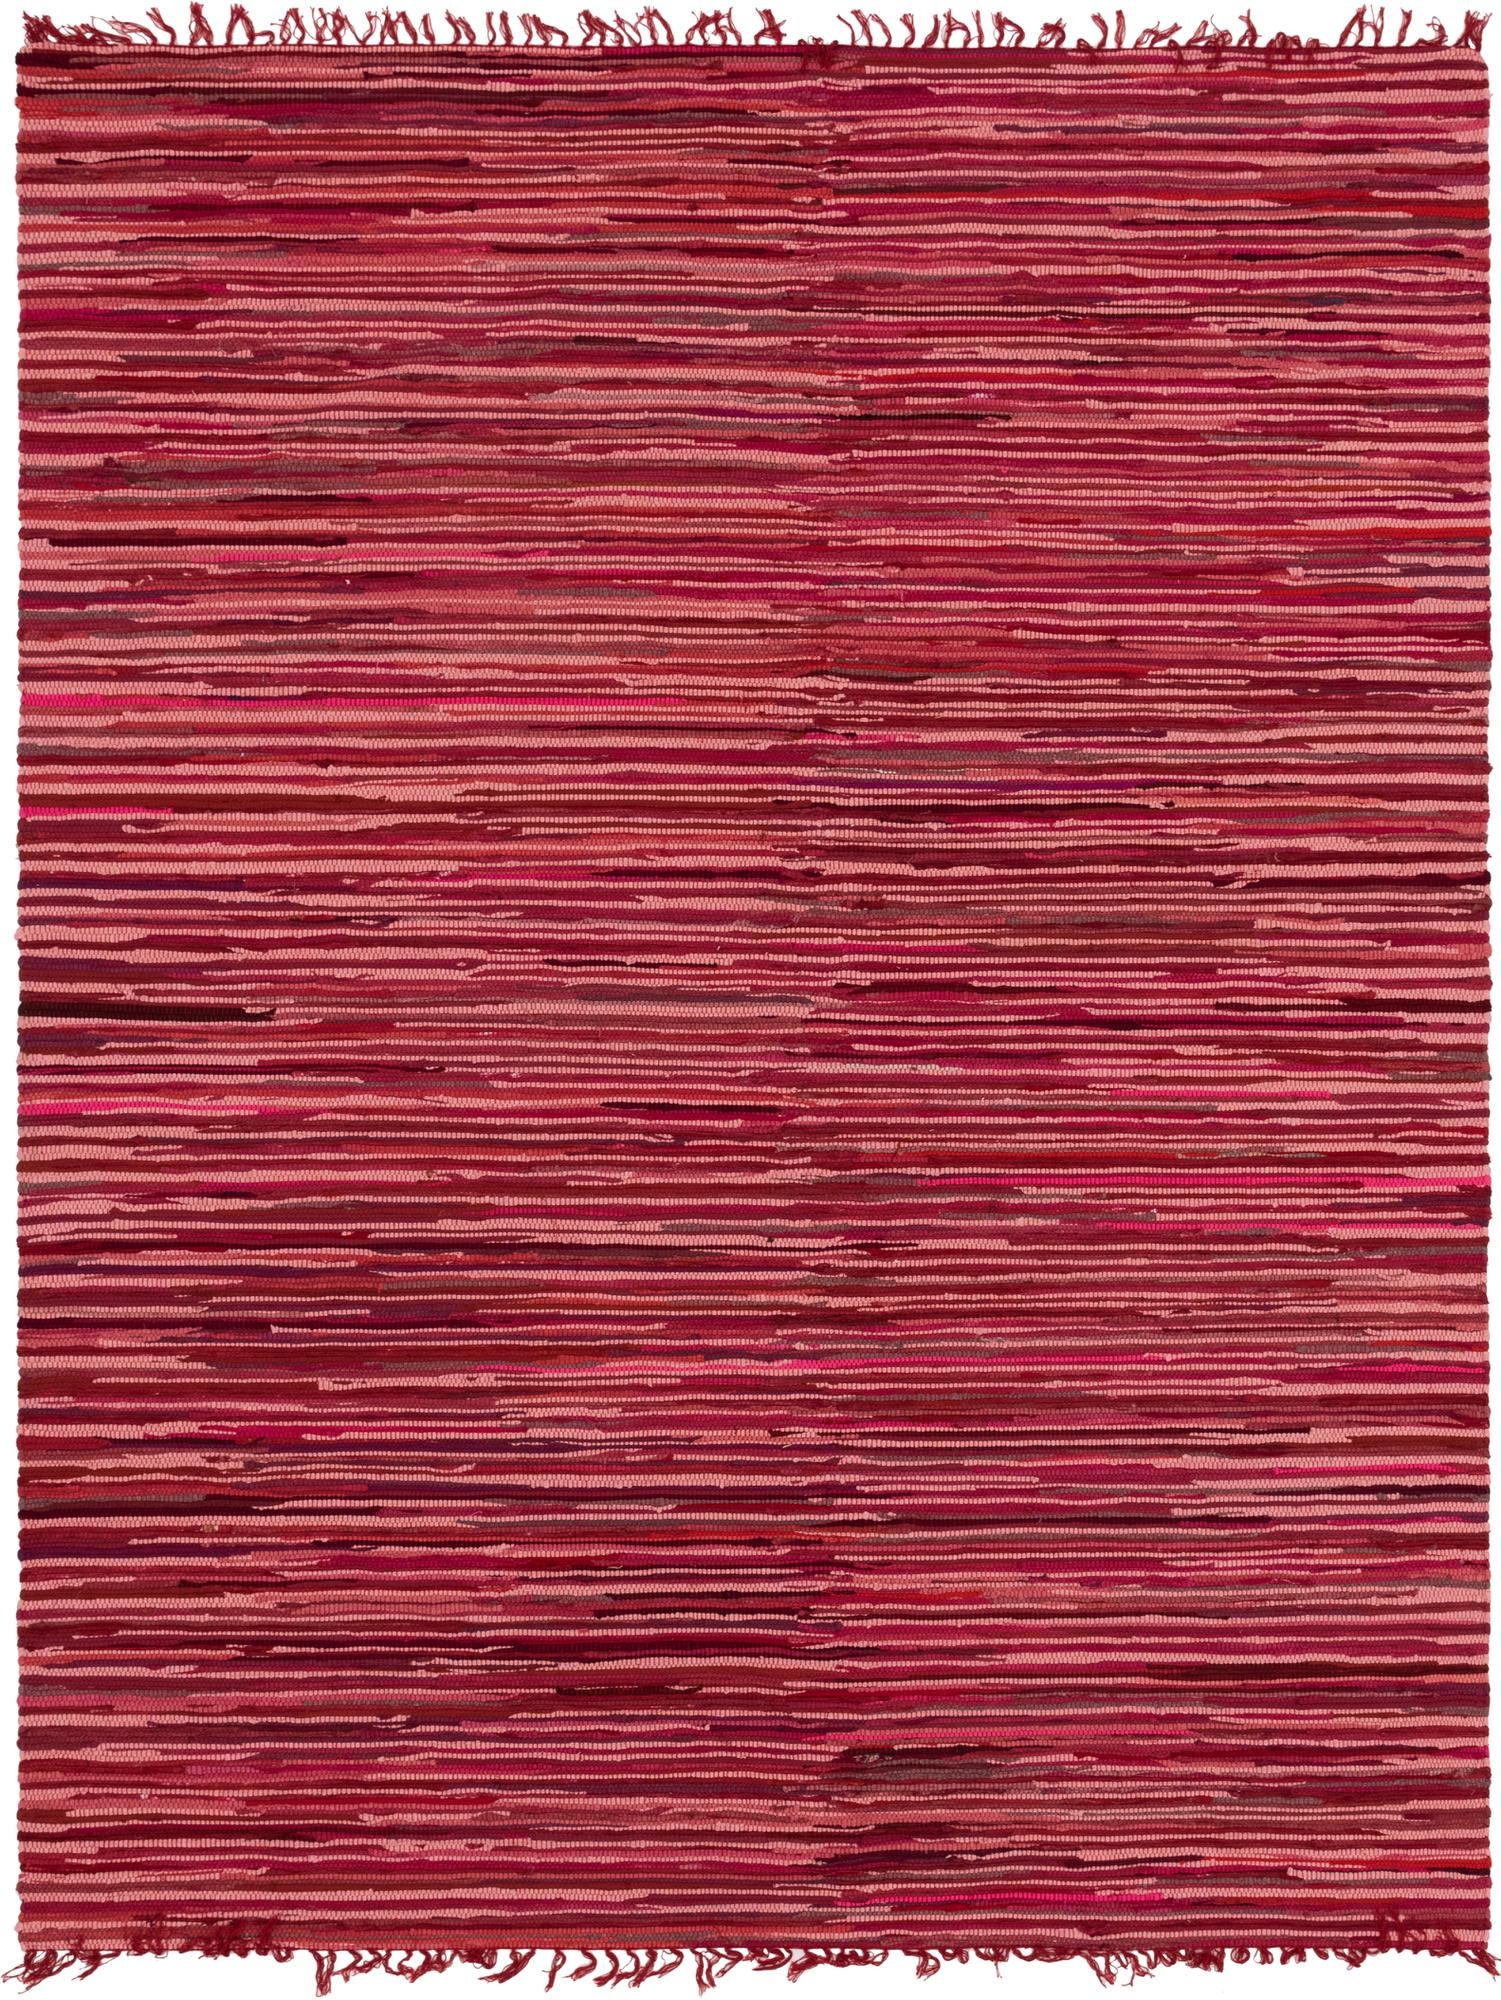 Unique Loom Striped Chindi Cotton Rug Red/Burgundy 8' x 10' Rectangle Hand Made Geometric Modern Perfect For Living Room Bed Room Dining Room Office - image 3 of 6